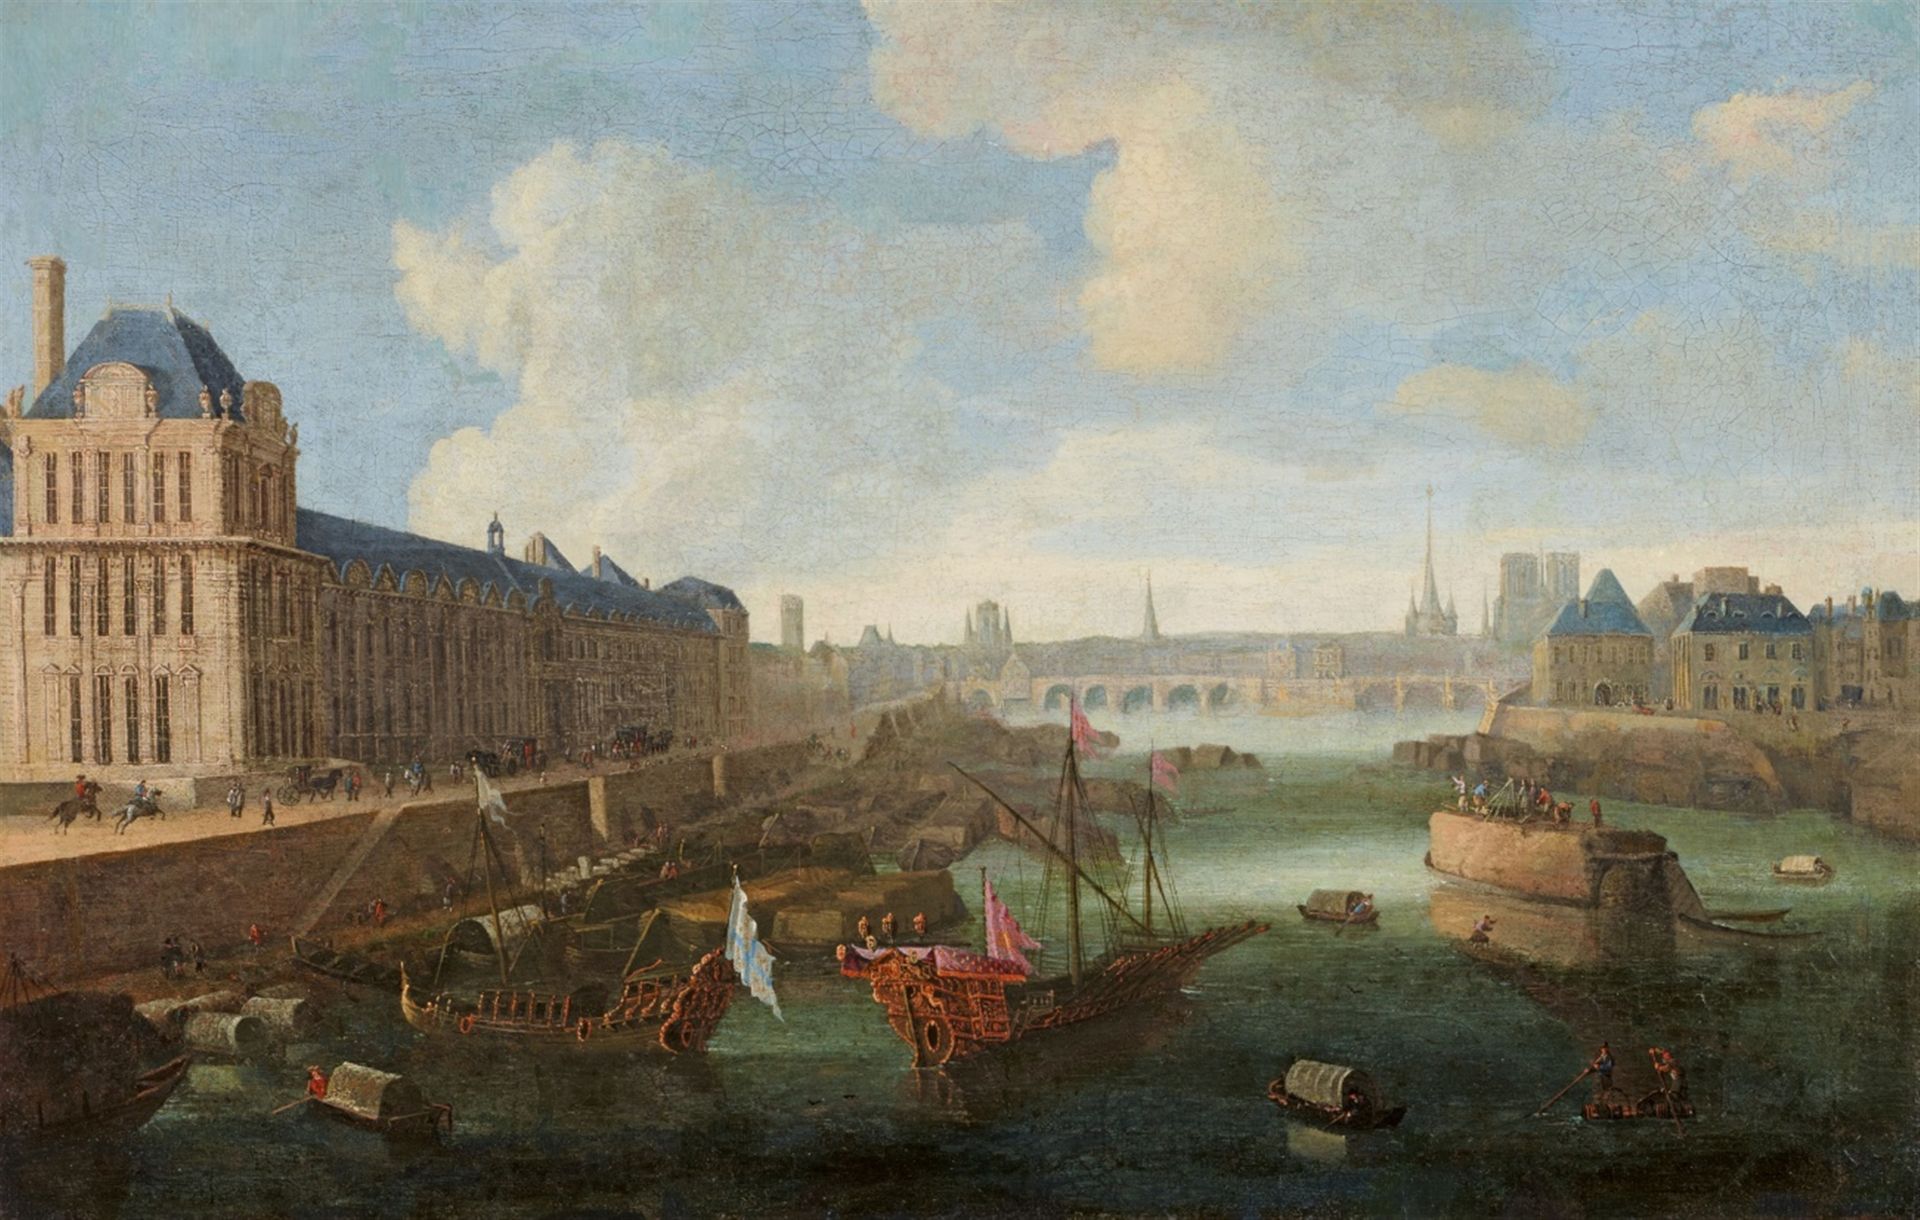 French or Netherlandish School, 17th Century, Construction of the “Pont Royal” Bridge in Paris